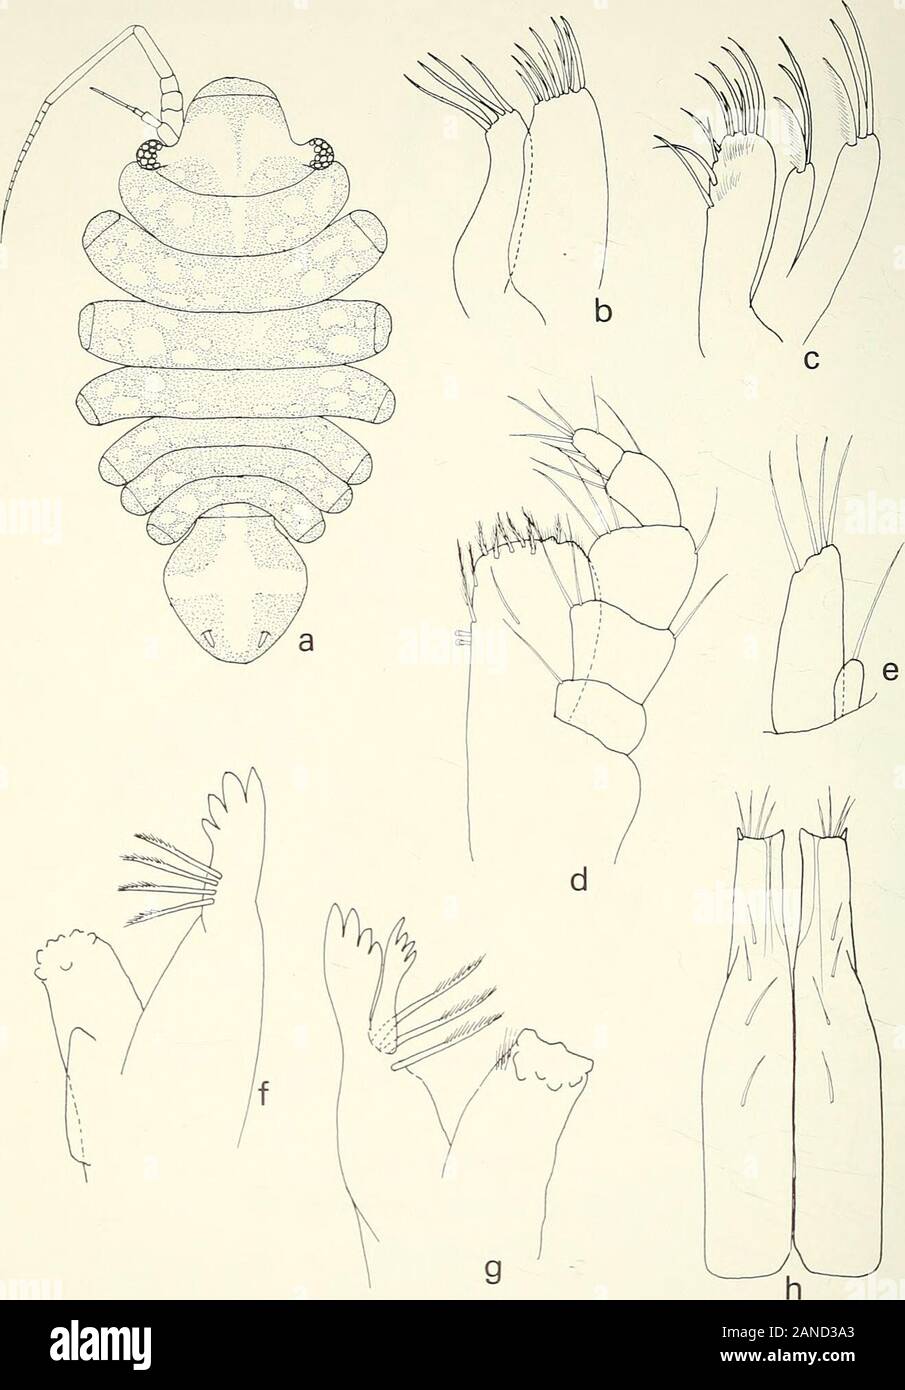 Annals of the South African Museum = Annale van die Suid-Afrikaanse Museum . Fig. 10. Pseudojanira stenetrioides. a. Mandible, b. Pereiopod VII. c. Pleopod 2 &lt;?.d. Pereiopod I. e. Pleopod 1 &lt;$. f. Maxilliped. 254 ANNALS OF THE SOUTH AFRICAN MUSEUM. Fig. 11. Munna {Munna) sheltoni. a. $ dorsal view. b. 1st maxilla, c. 2nd maxilla,d. Maxilliped. e. Uropod. f. Right mandible, g. Left mandible, h. Pleopod 1 c?. NEW RECORDS OF MARINE CRUSTACEA ISOPODA FROM SOUTH AFRICA 255 Stock Photo